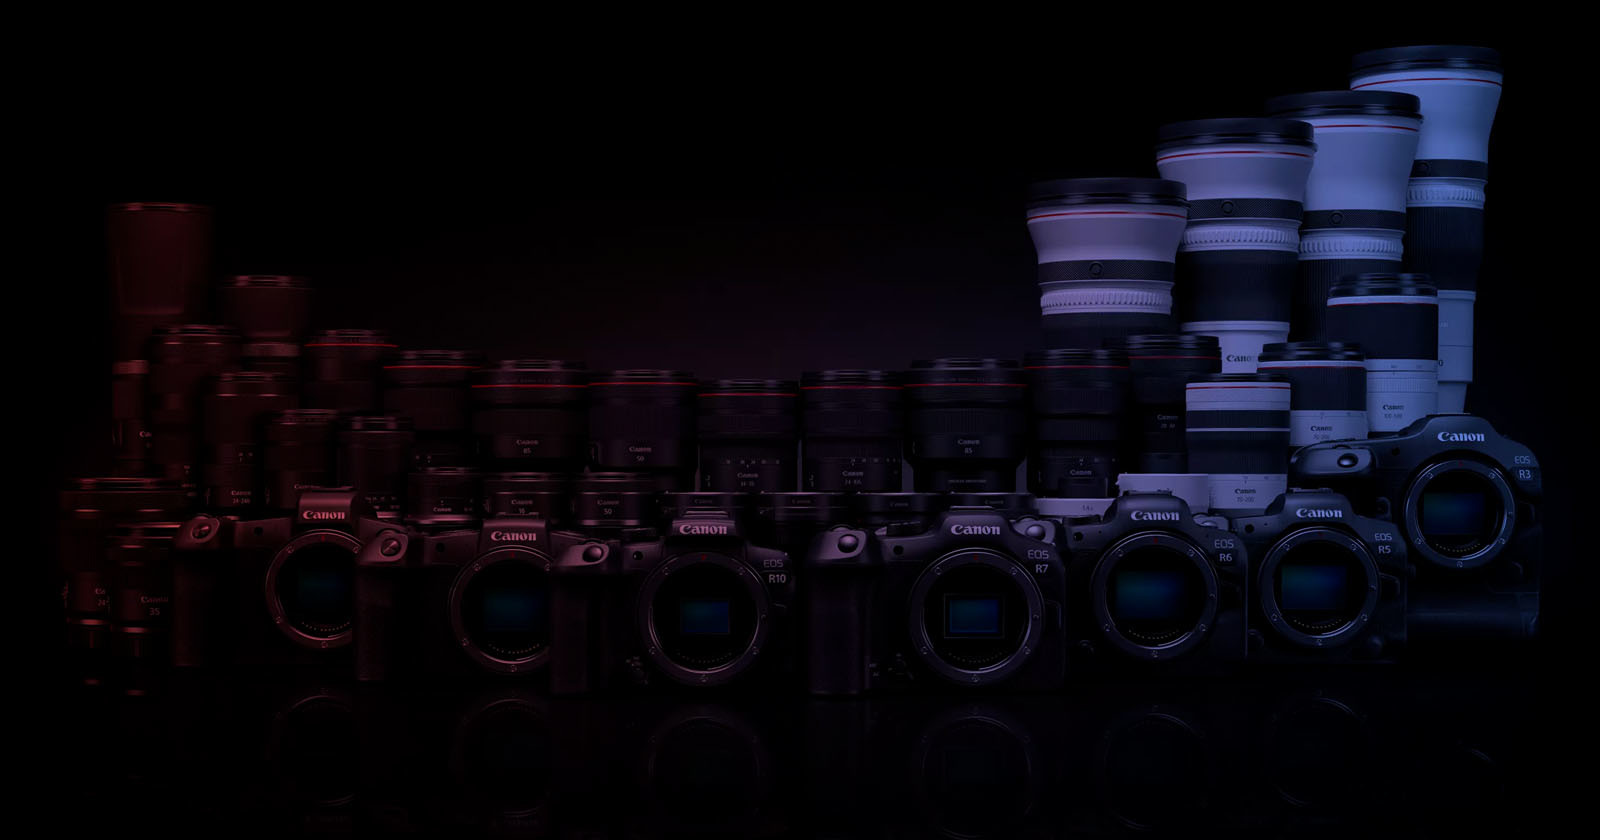 Canon Japan to Increase Prices on 19 Cameras and 42 Lenses